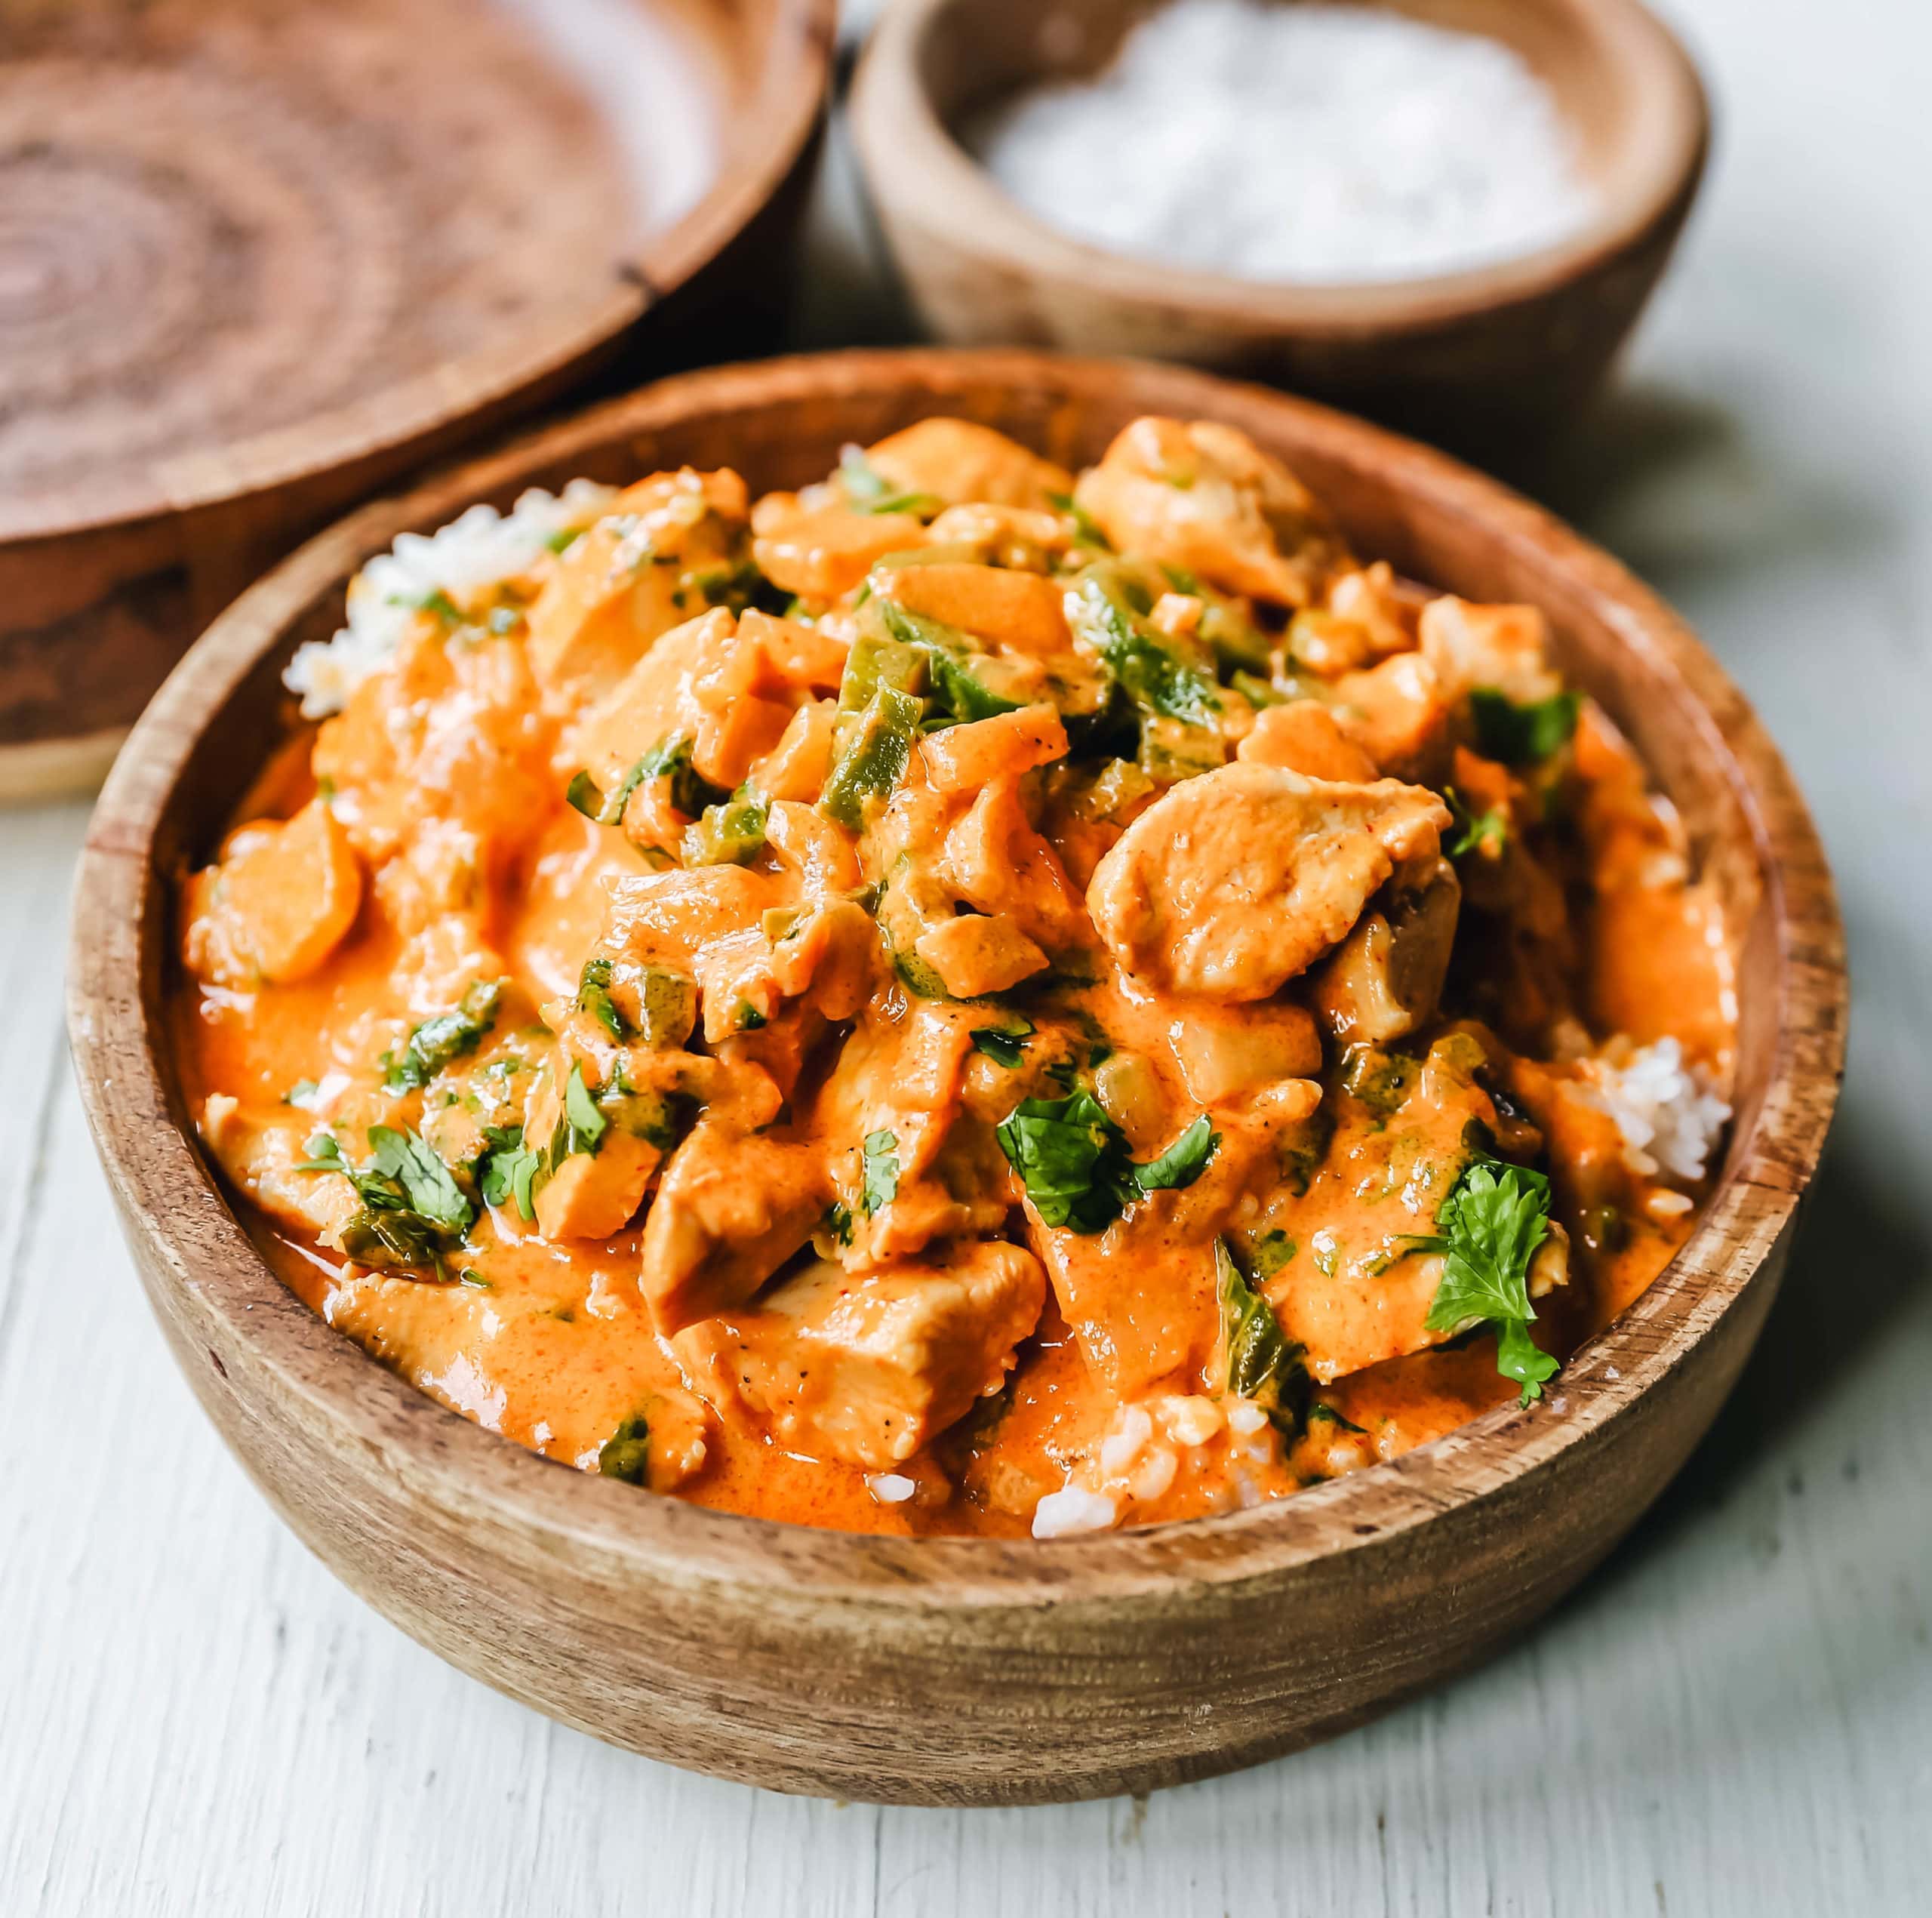 Thai Red Chicken Curry. Flavorful, red curry-spiced chicken curry is way better than any restaurant and you save so much by making it at home! The Best Red Chicken Curry recipe. www.modernhoney.com #curry #chickencurry #thaifood